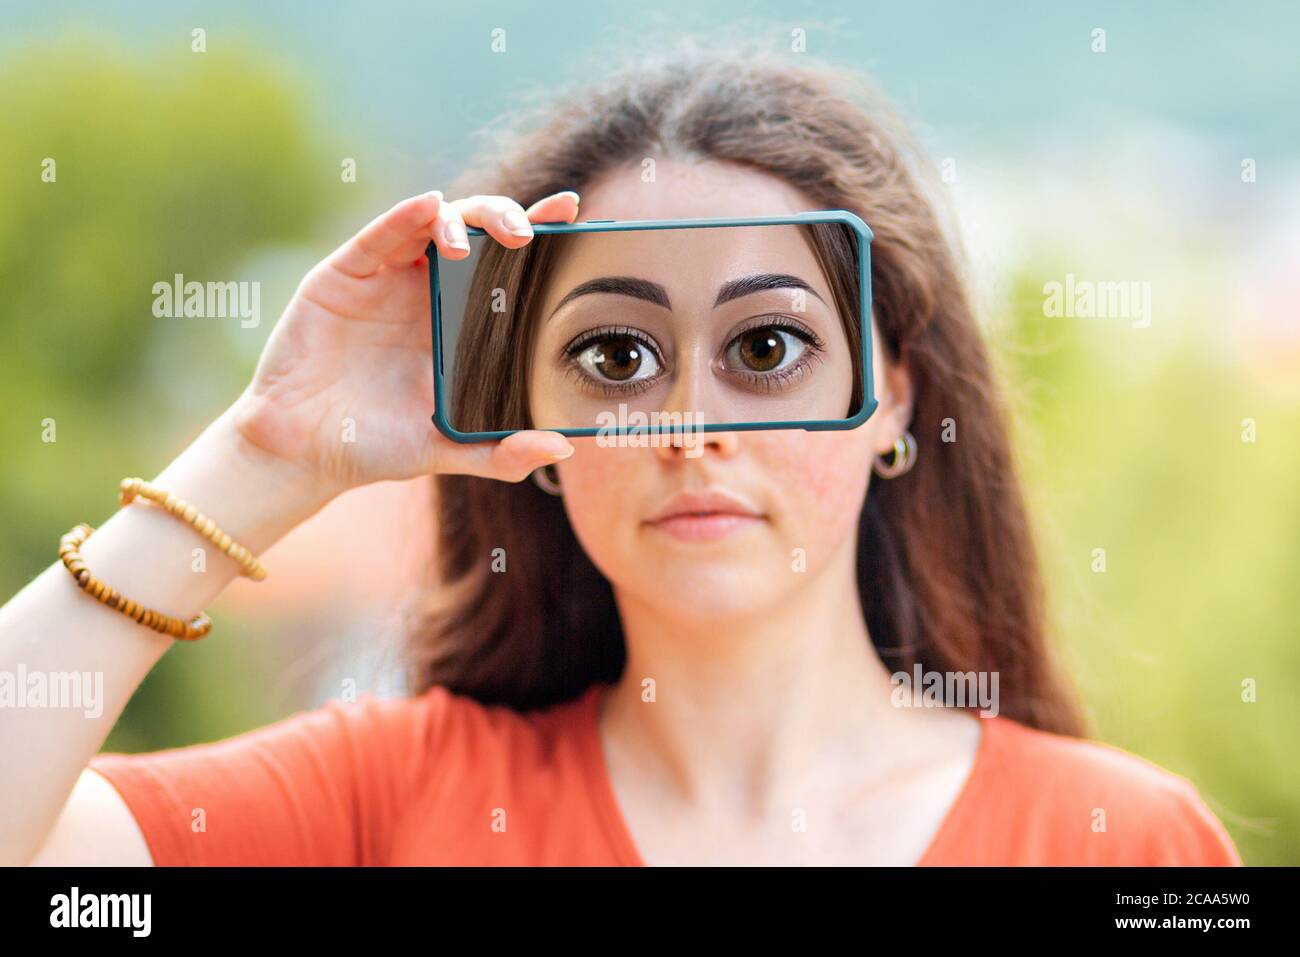 A woman closes her eyes with a smartphone, with a picture of huge cartoon eyes. The concept of hiding identity and fake pages in social networks. Stock Photo